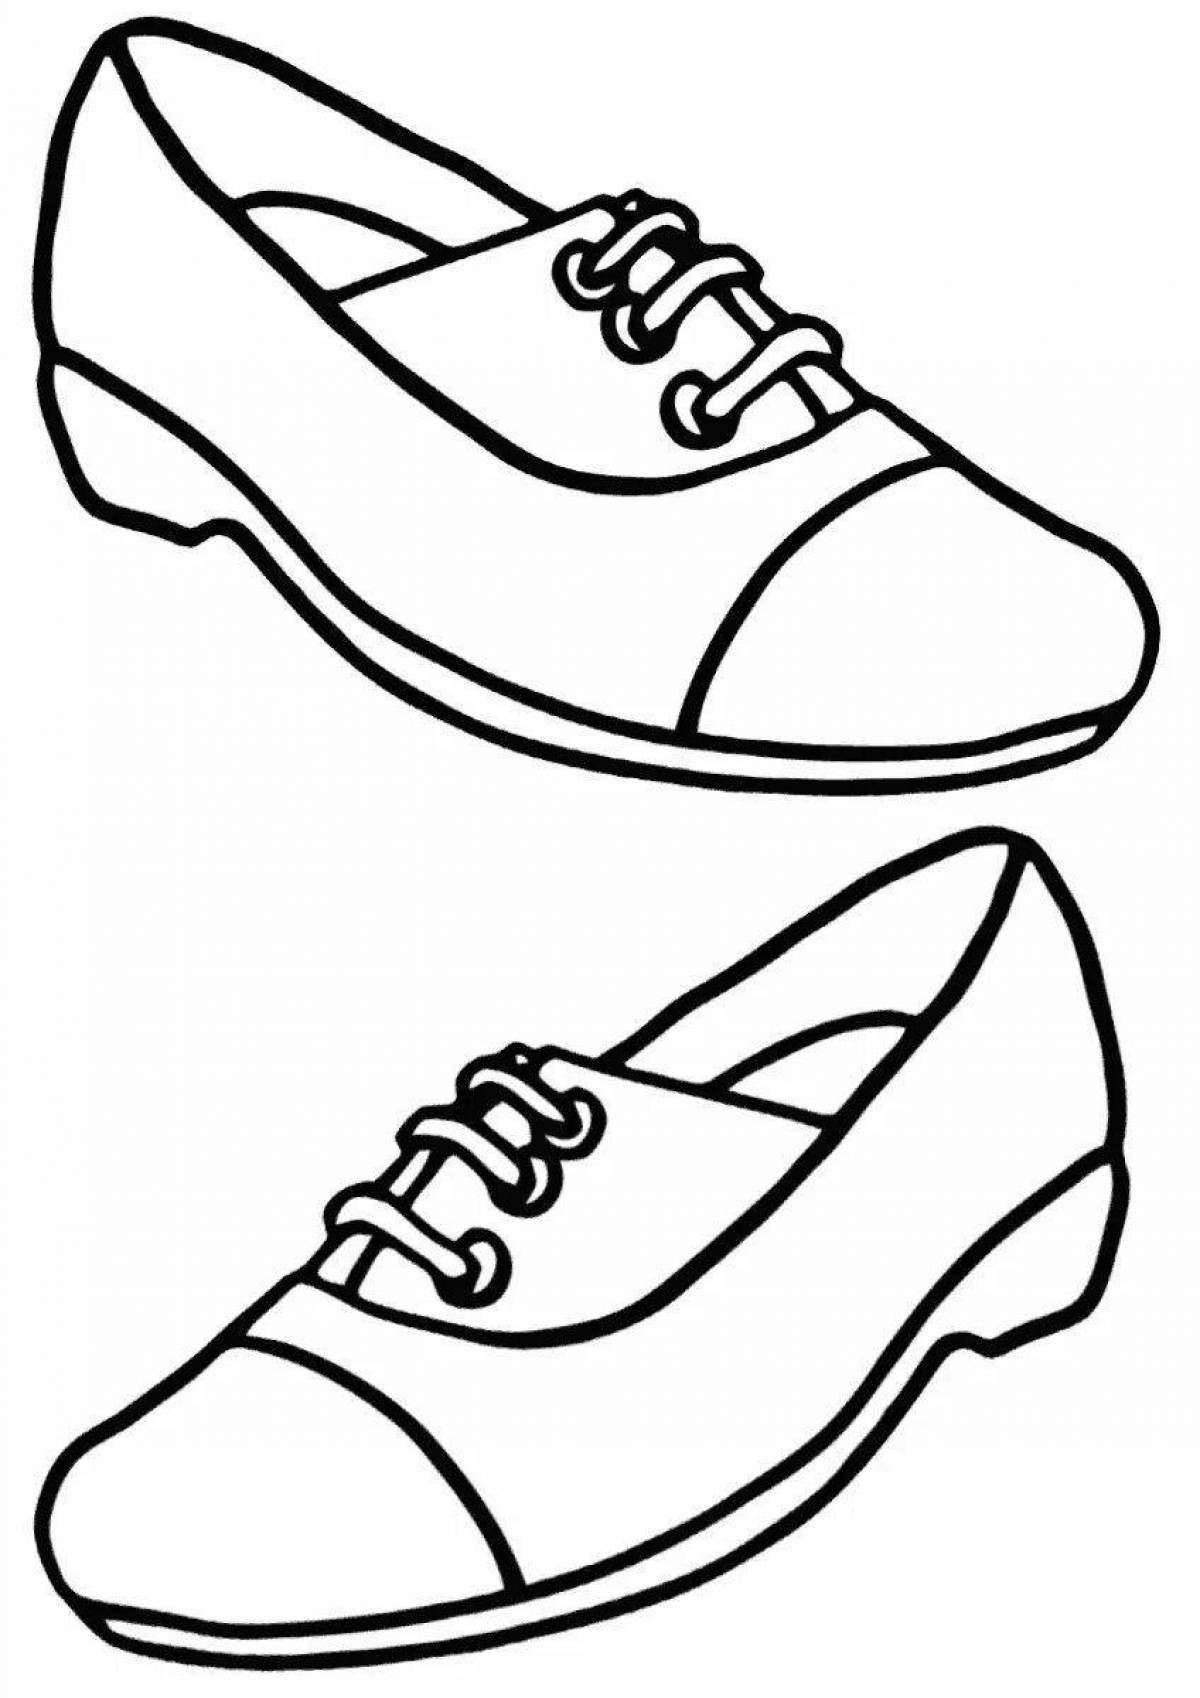 Coloring fairy shoes for children